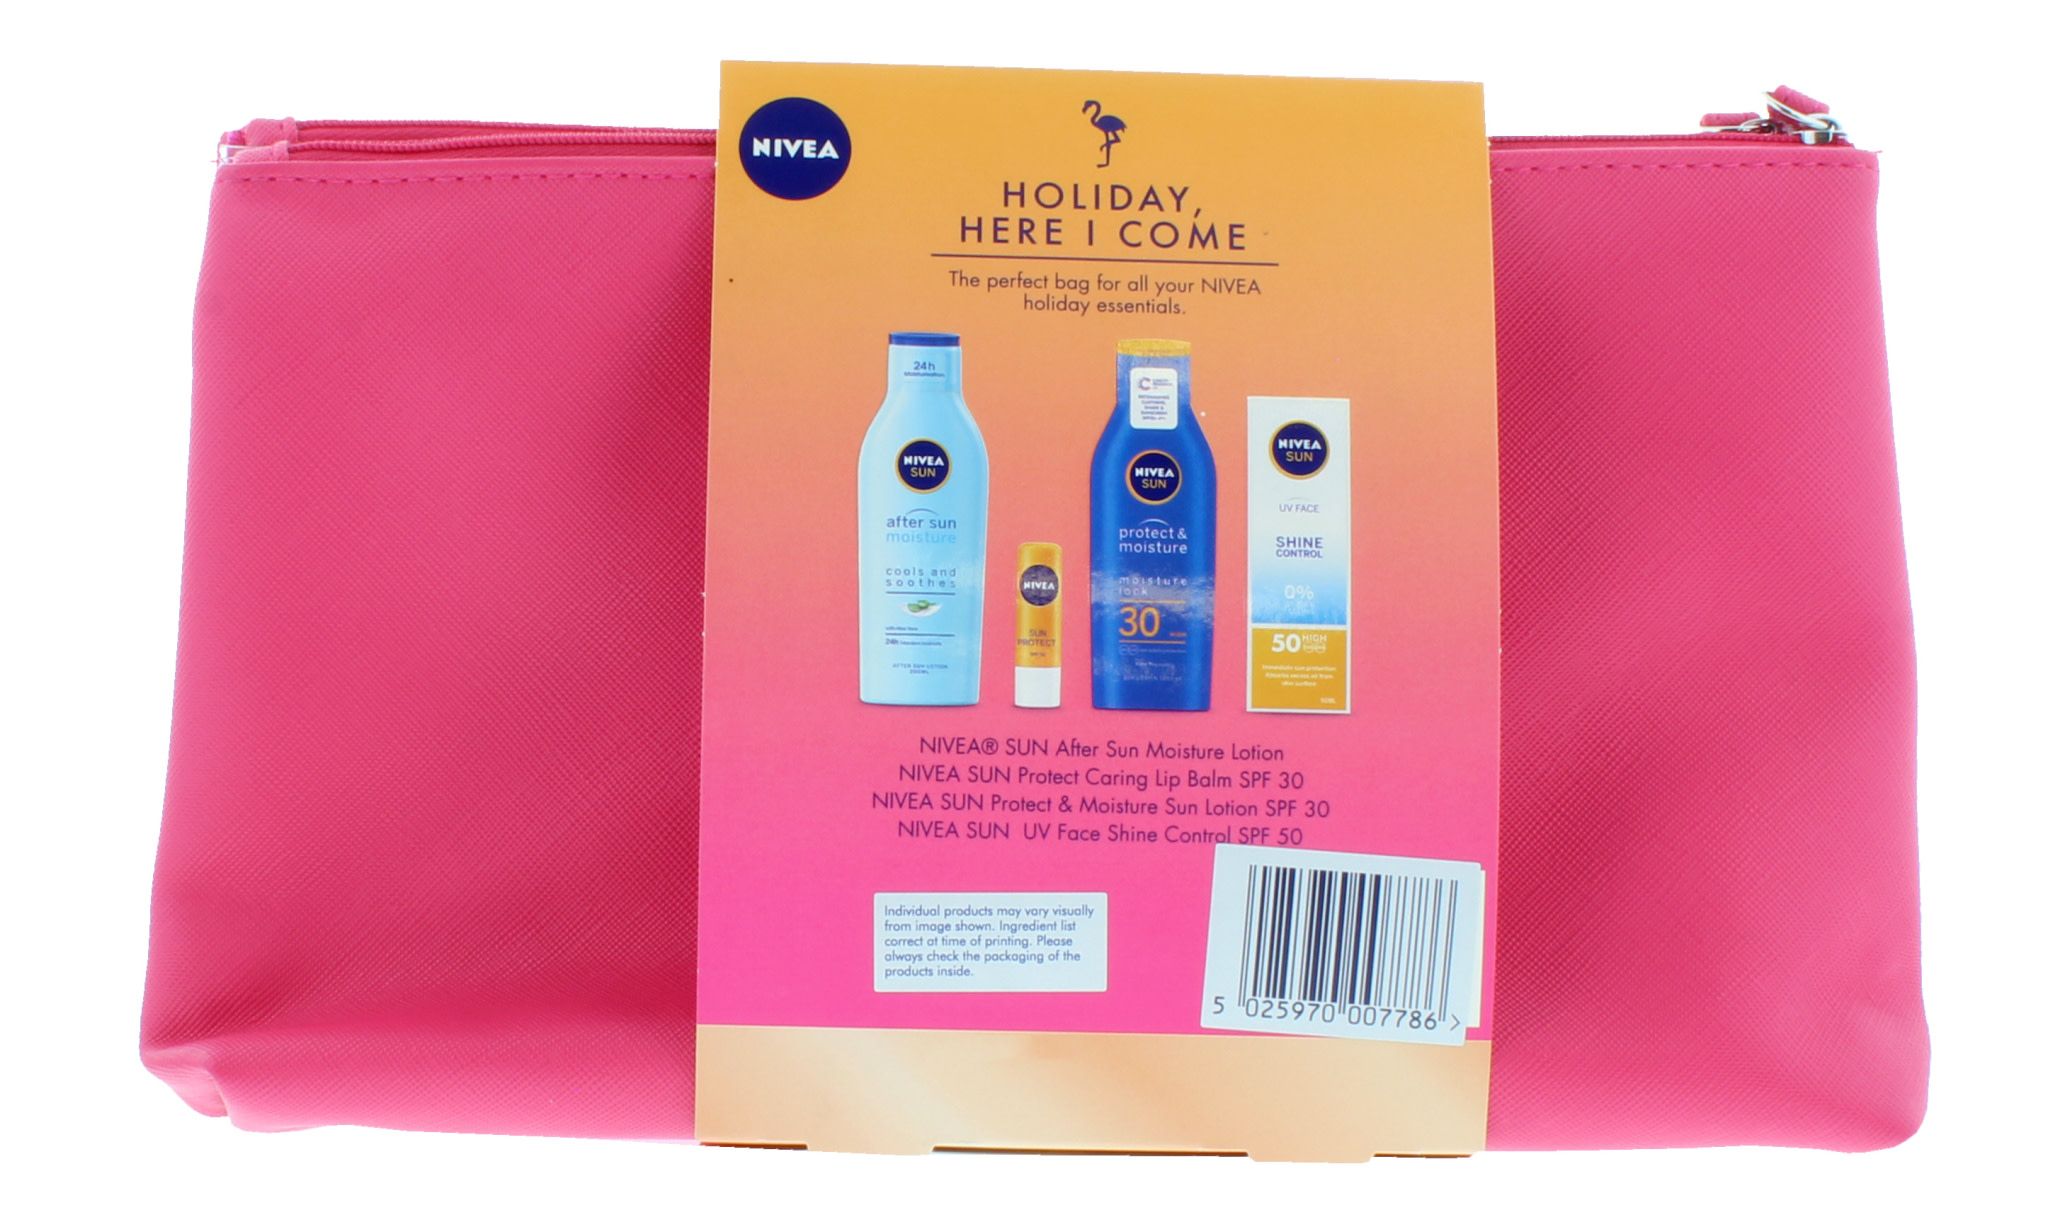 Nivea Sun Holiday Here I Come Set is the perfect bag for all your Nivea holiday essentials. This Nivea Sun set includes: Nivea Sun After Sun Moisture Lotion 200ml + Nivea Sun Protect Caring Lip Balm SPF30 4.8g + Nivea Sun Protect & Moisture Sun Lotion SPF30 200ml + Nivea Sun UV Face Shine Control SPF50 50ml + Pink Toiletry Bag with two handy pockets inside. This is a pack of 2 gift sets.